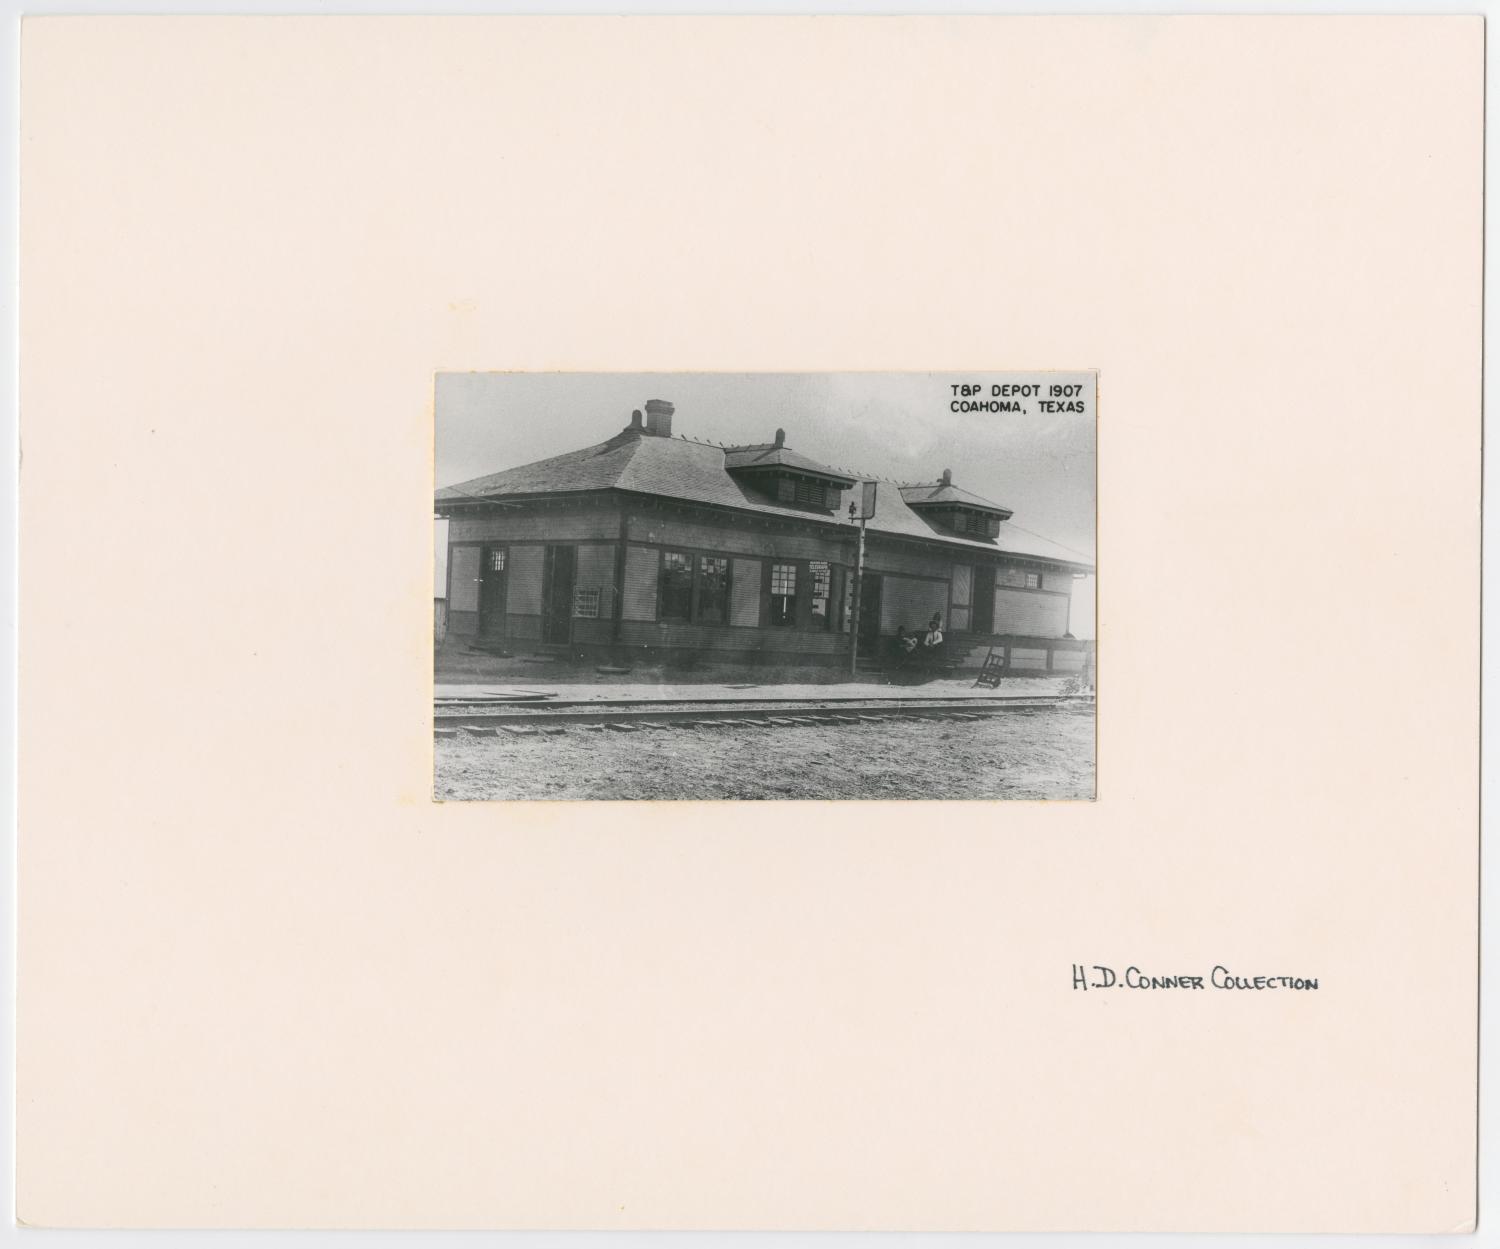 Images of Texas & Pacific Stations and Structures in  Coahoma, TX